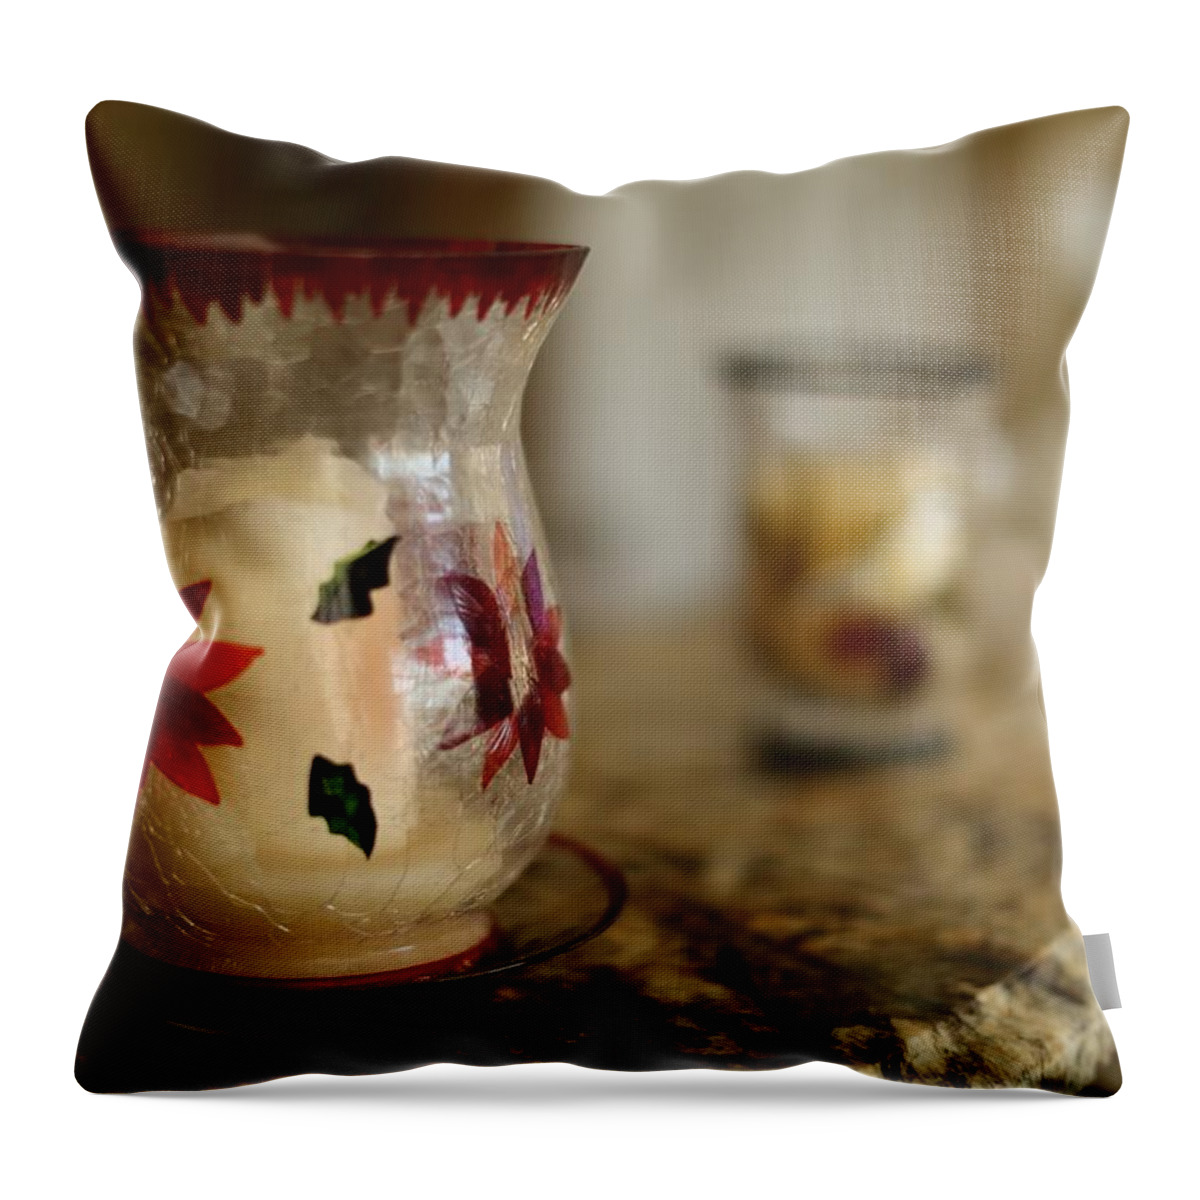 Glass Candle Holders Throw Pillow featuring the photograph Glass Candle Holders by Mingming Jiang